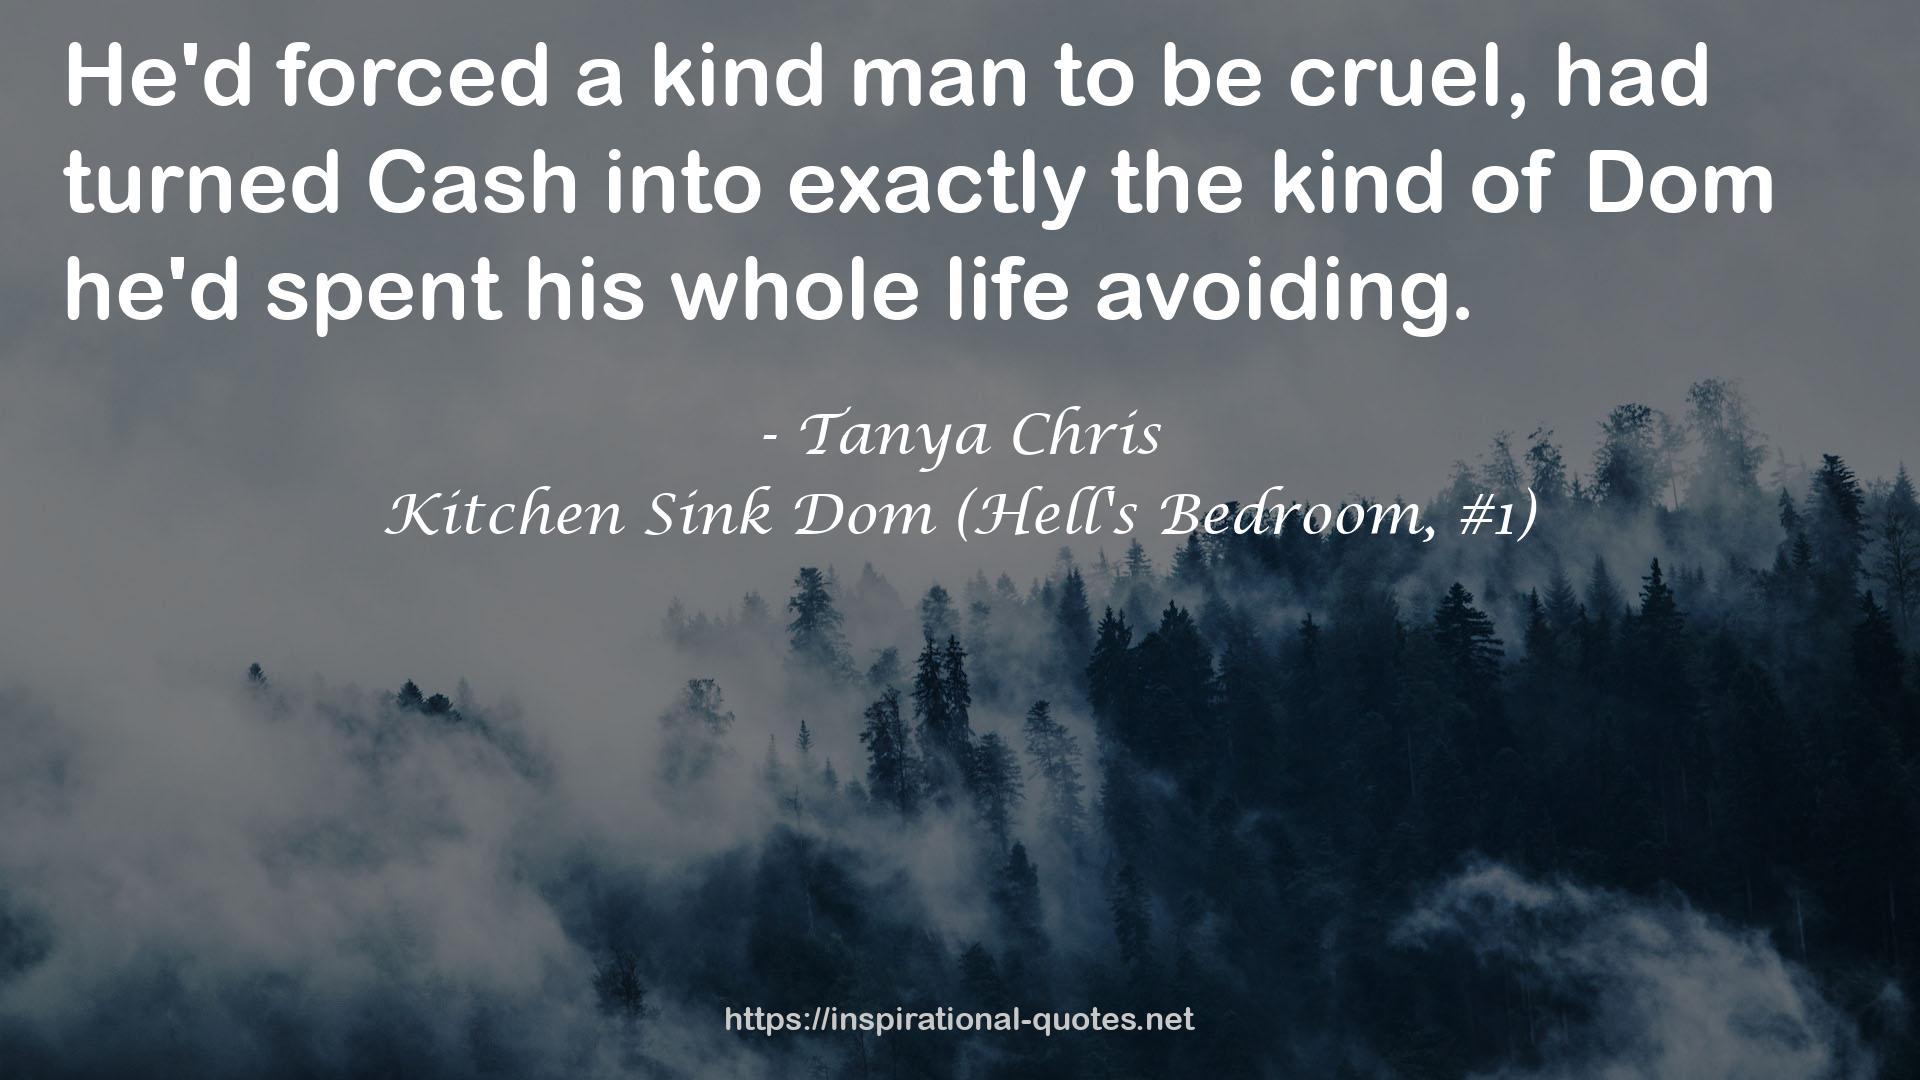 Kitchen Sink Dom (Hell's Bedroom, #1) QUOTES